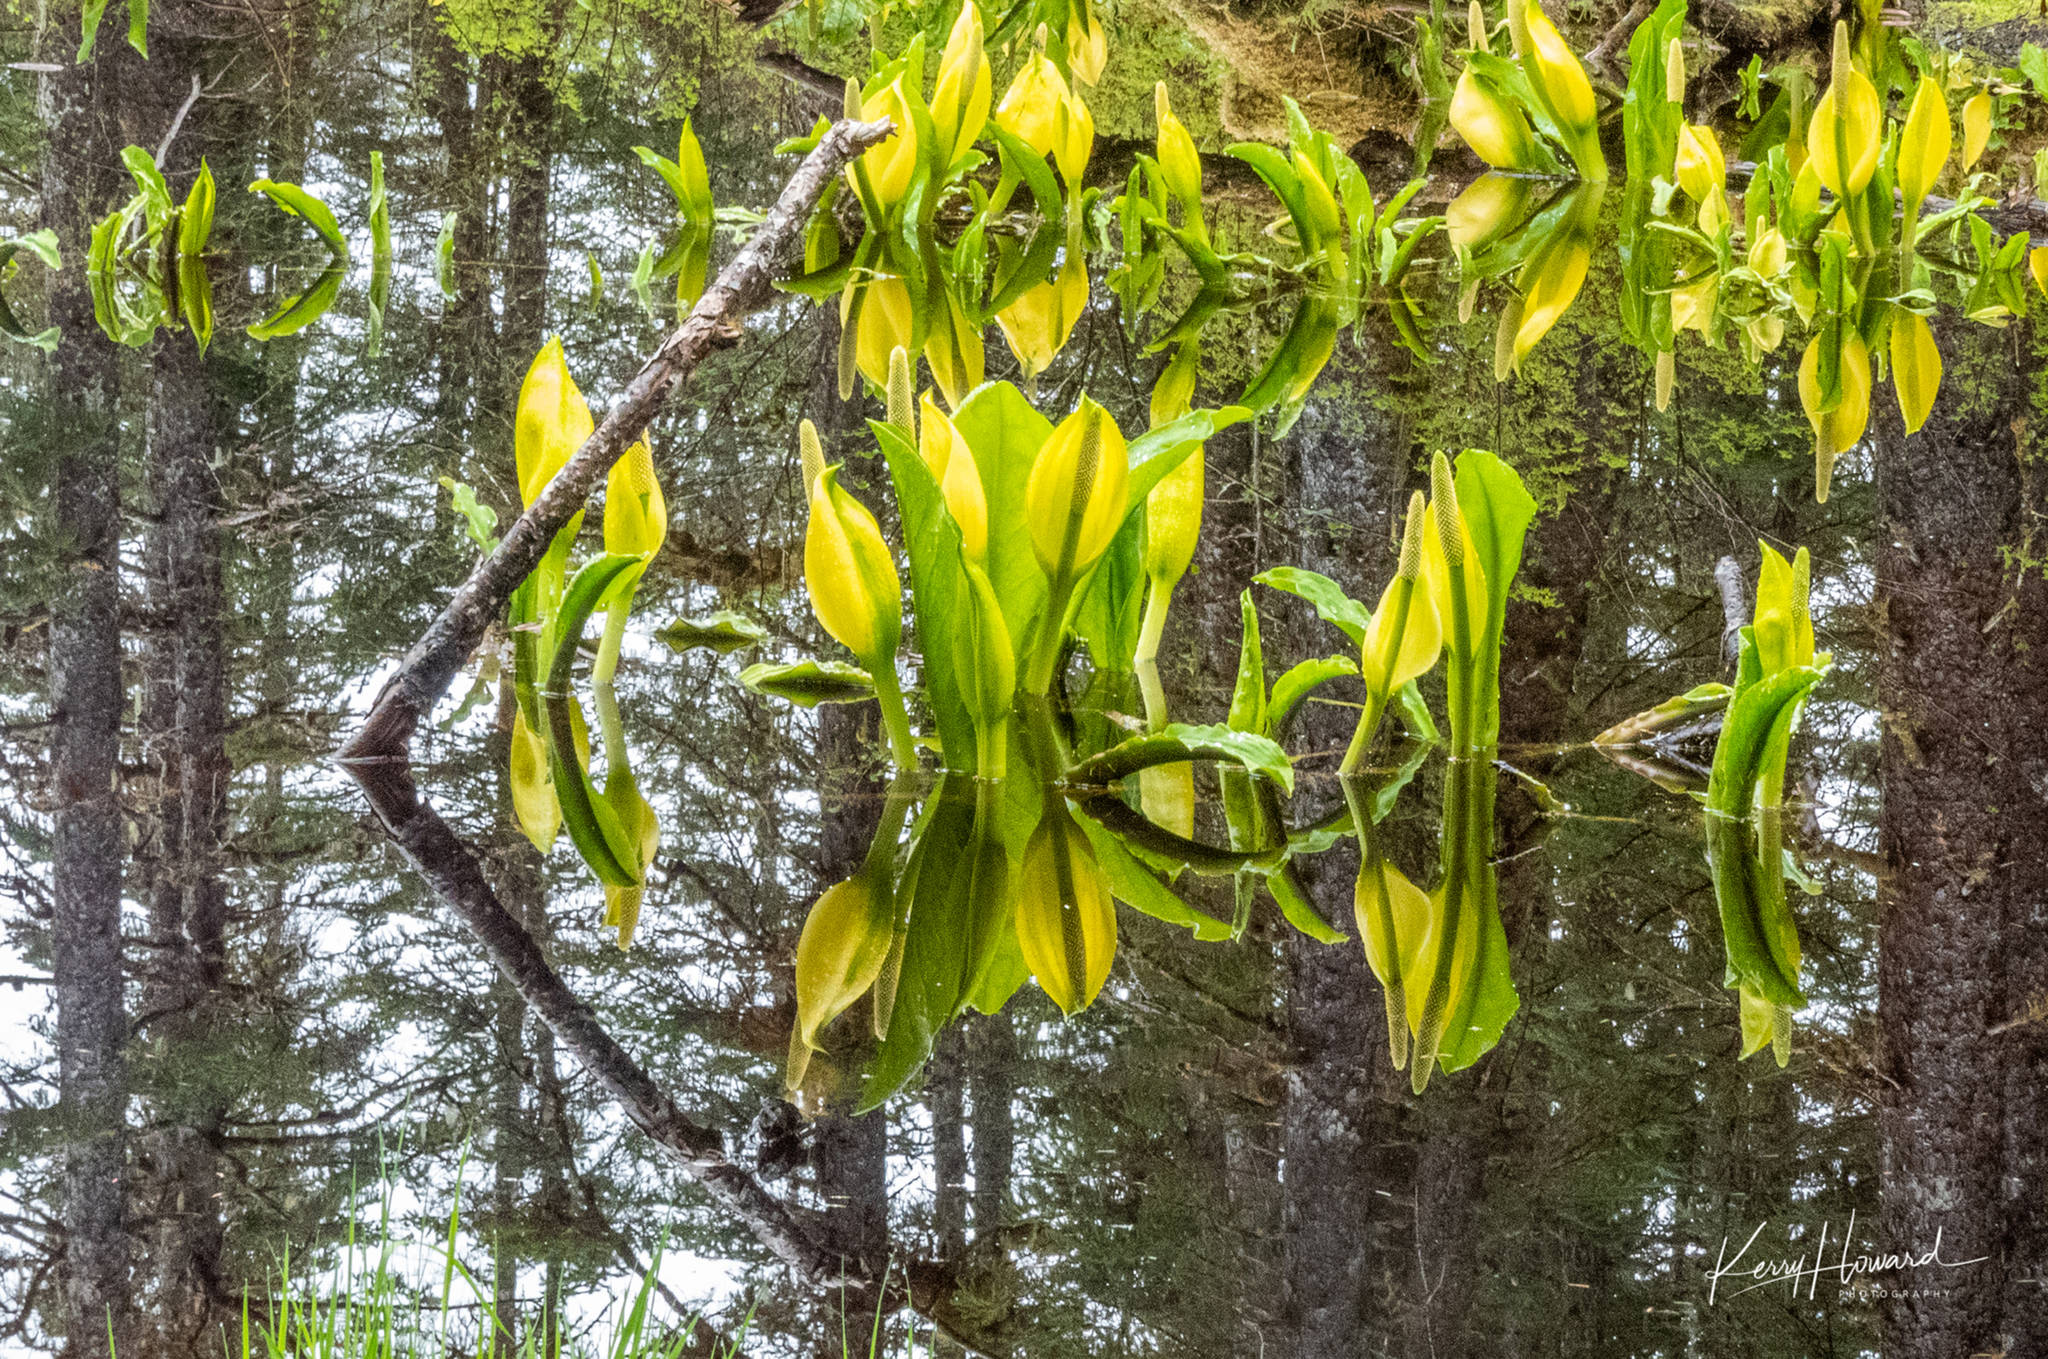 Skunk cabbage reflects along Cowee Creek Trail on May 15, 2019. (Courtesy Photo | Kerry Howard)